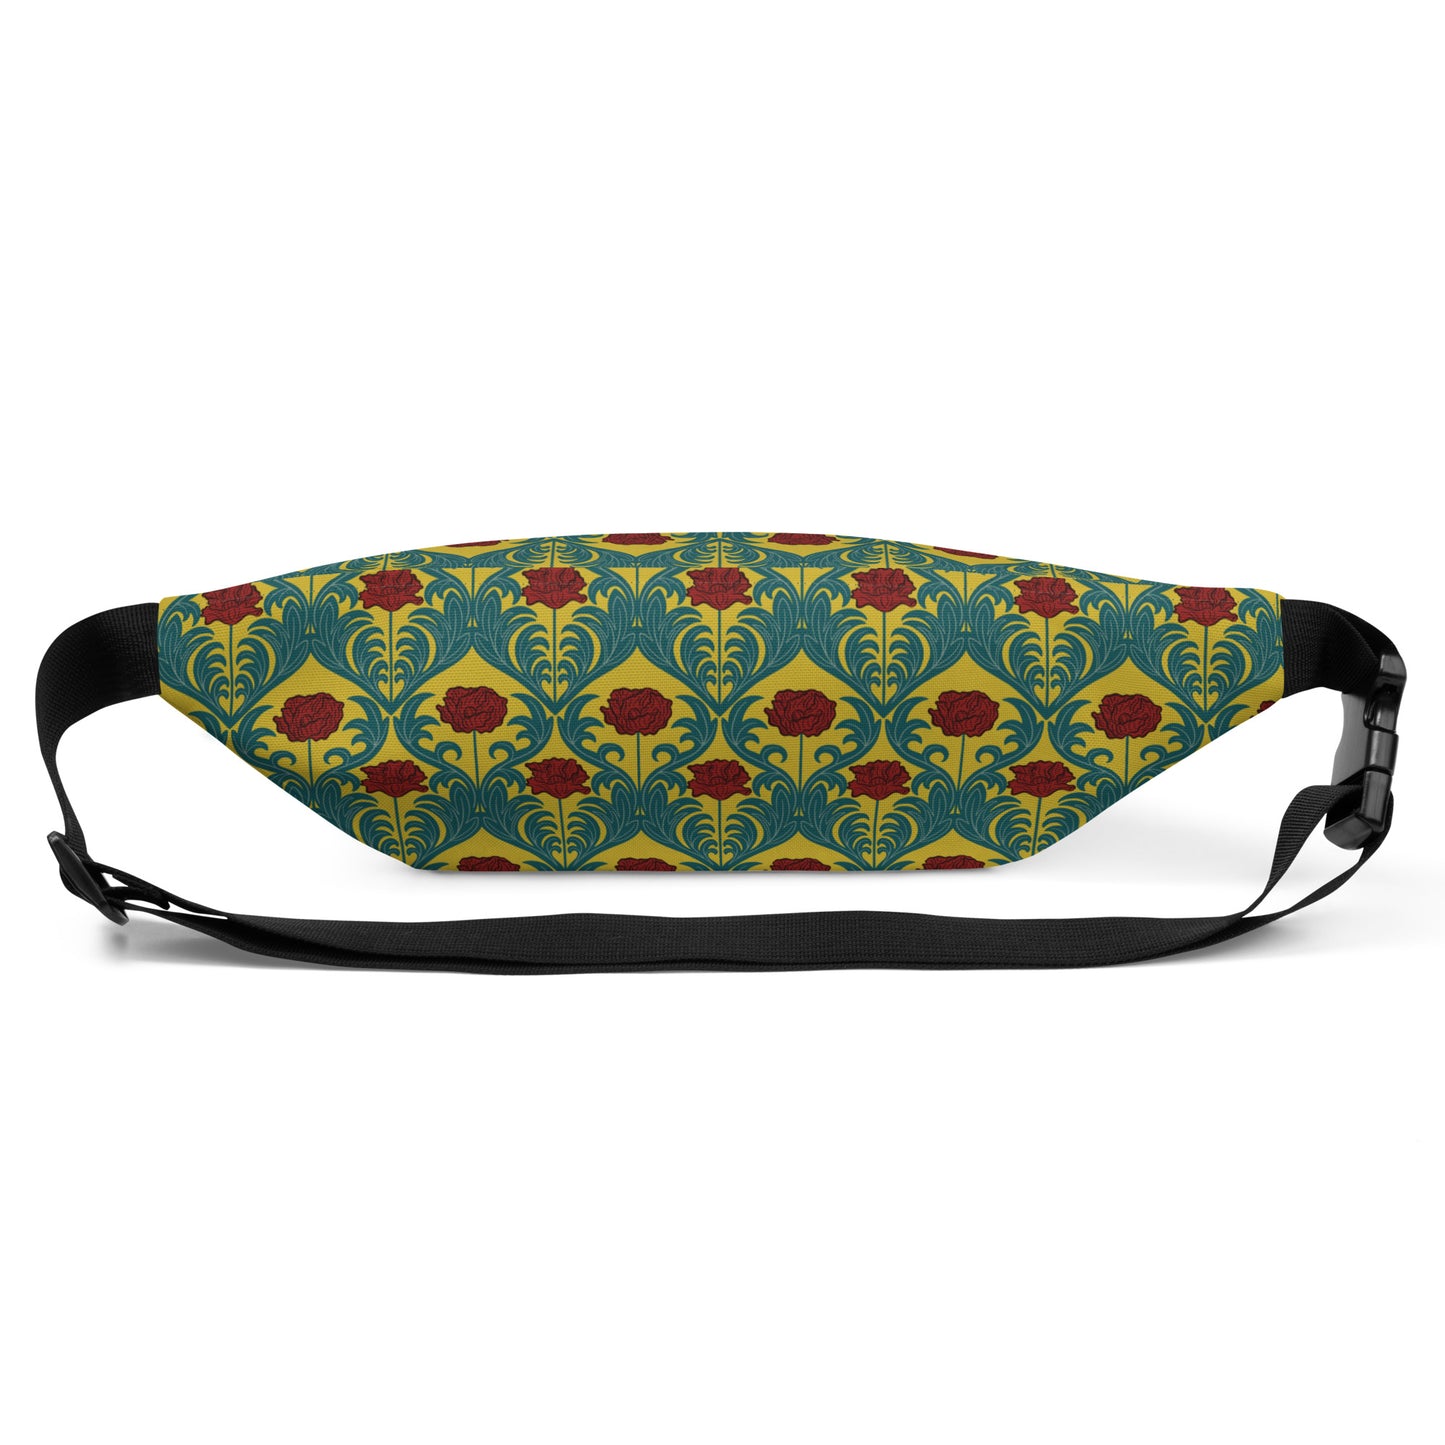 Yellow fanny pack with red flowers and green leaves